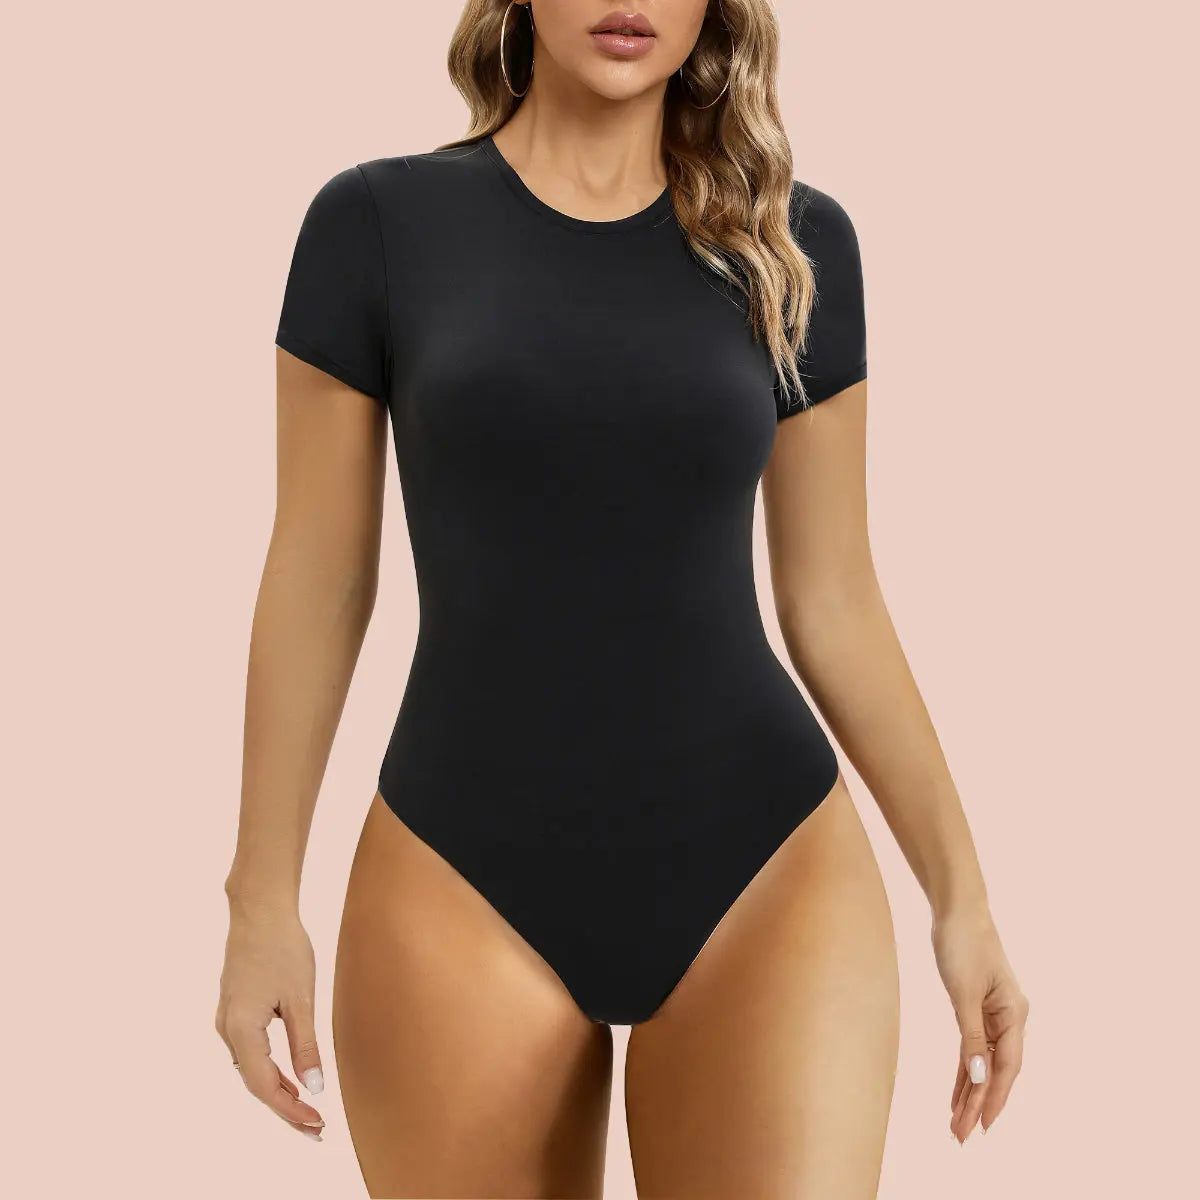 Freehut Women's Bodysuit Short Sleeve Double Lined Crew Round Neck Thong  Slimming Body Suit Tops Softhug Collection (Black, X-Small) at   Women's Clothing store